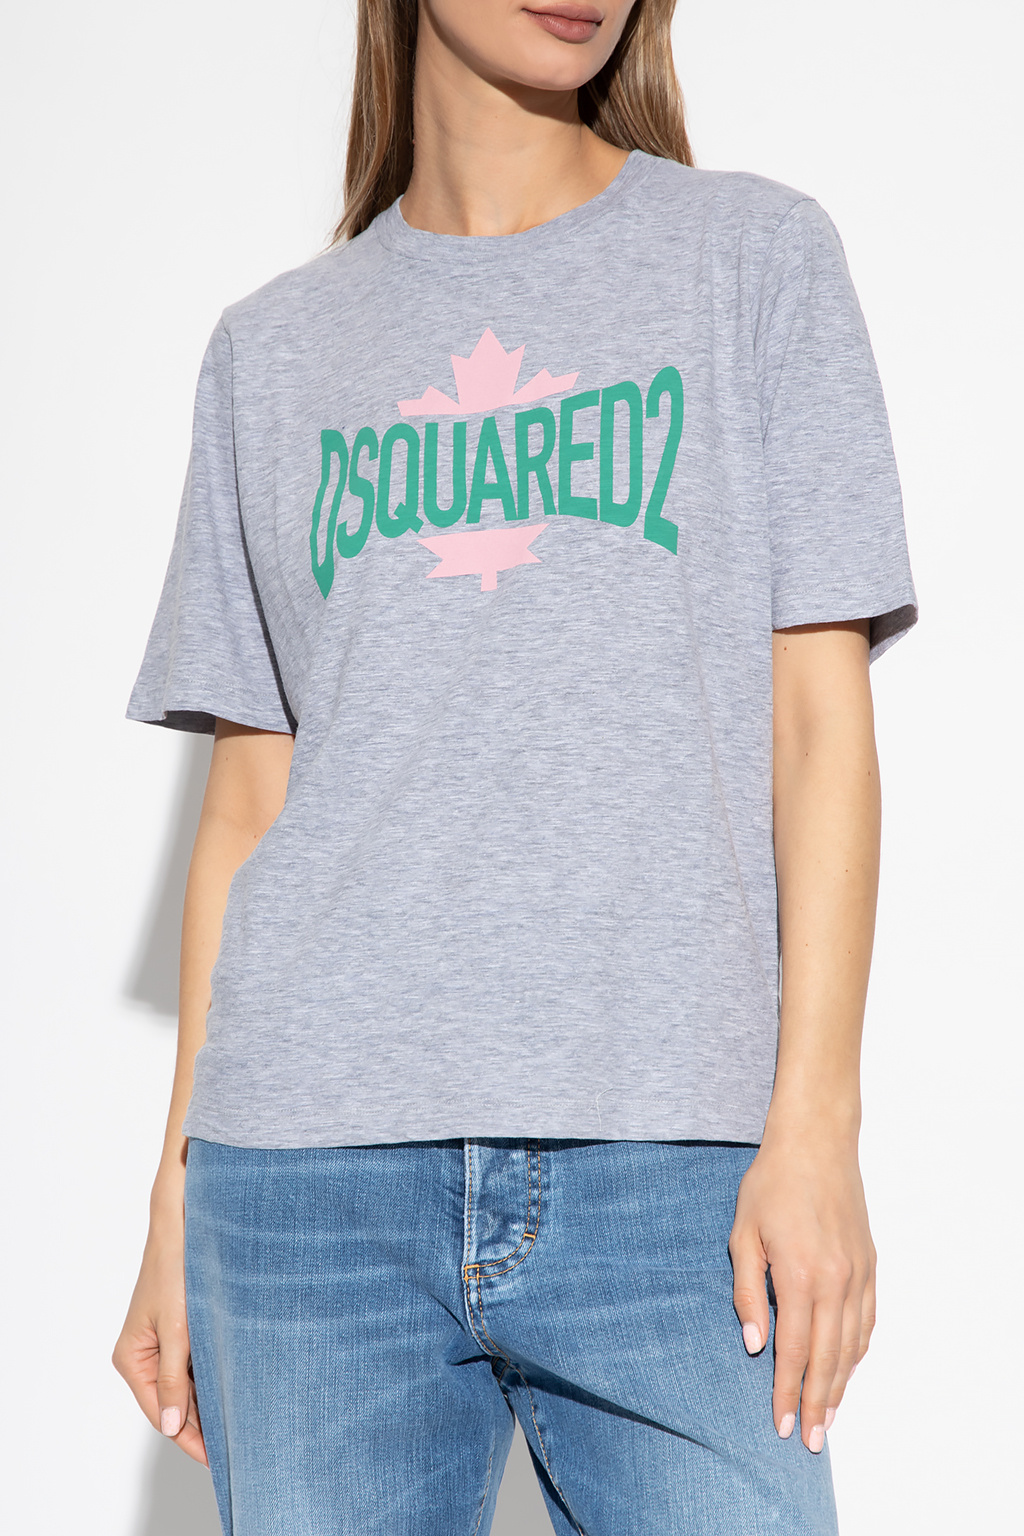 Dsquared2 Calvin Klein Iconic Short Sleeve T-Shirt